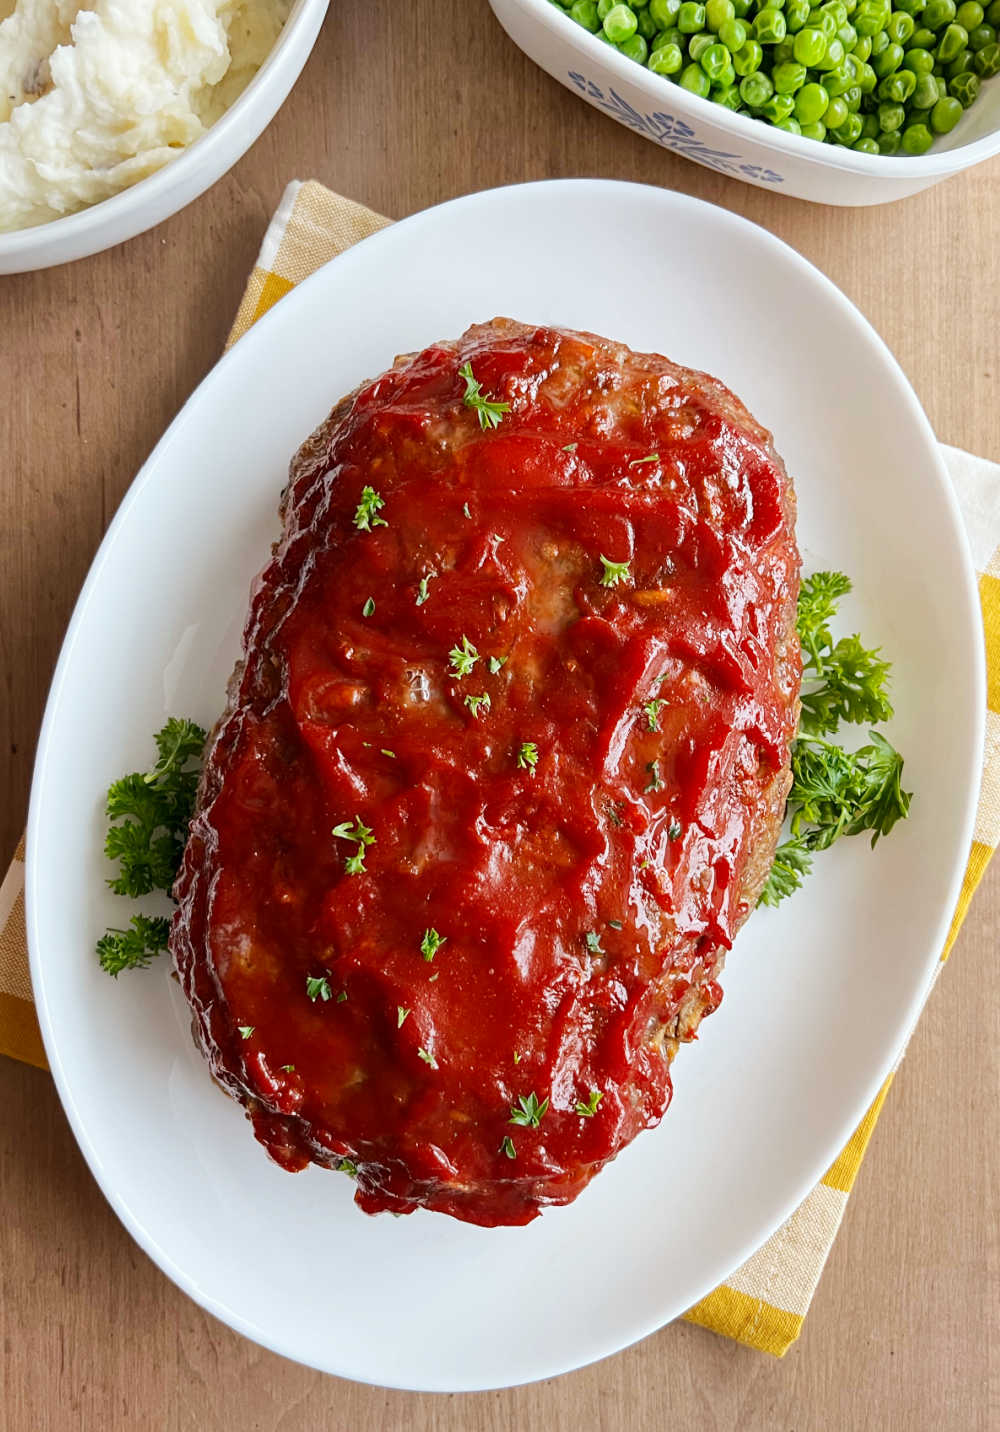 meatloaf with stuffing on a platter with parsley, mashed potatoes and peas.